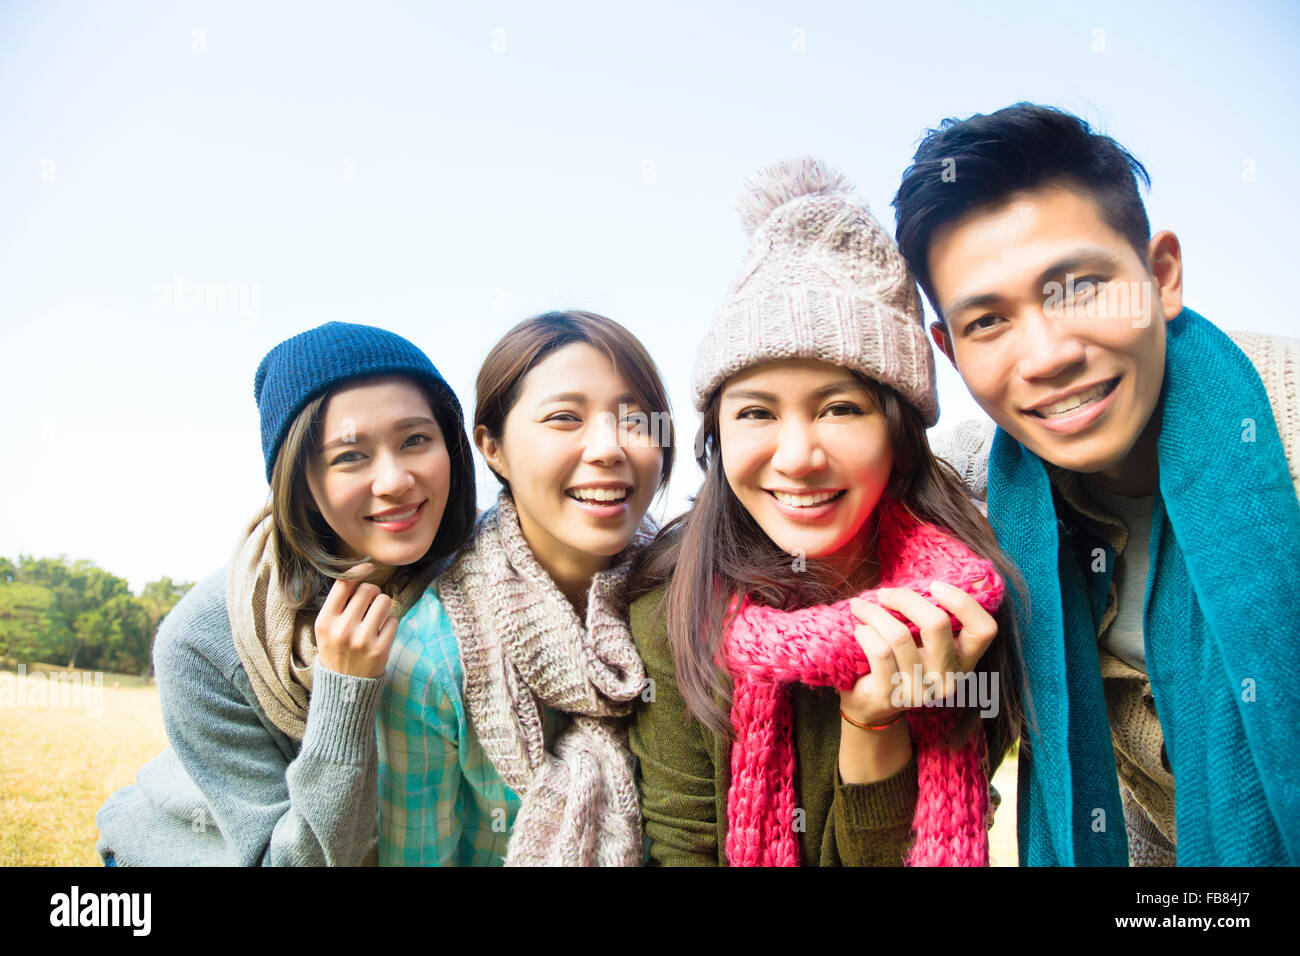 happy young group with winter wear Stock Photo